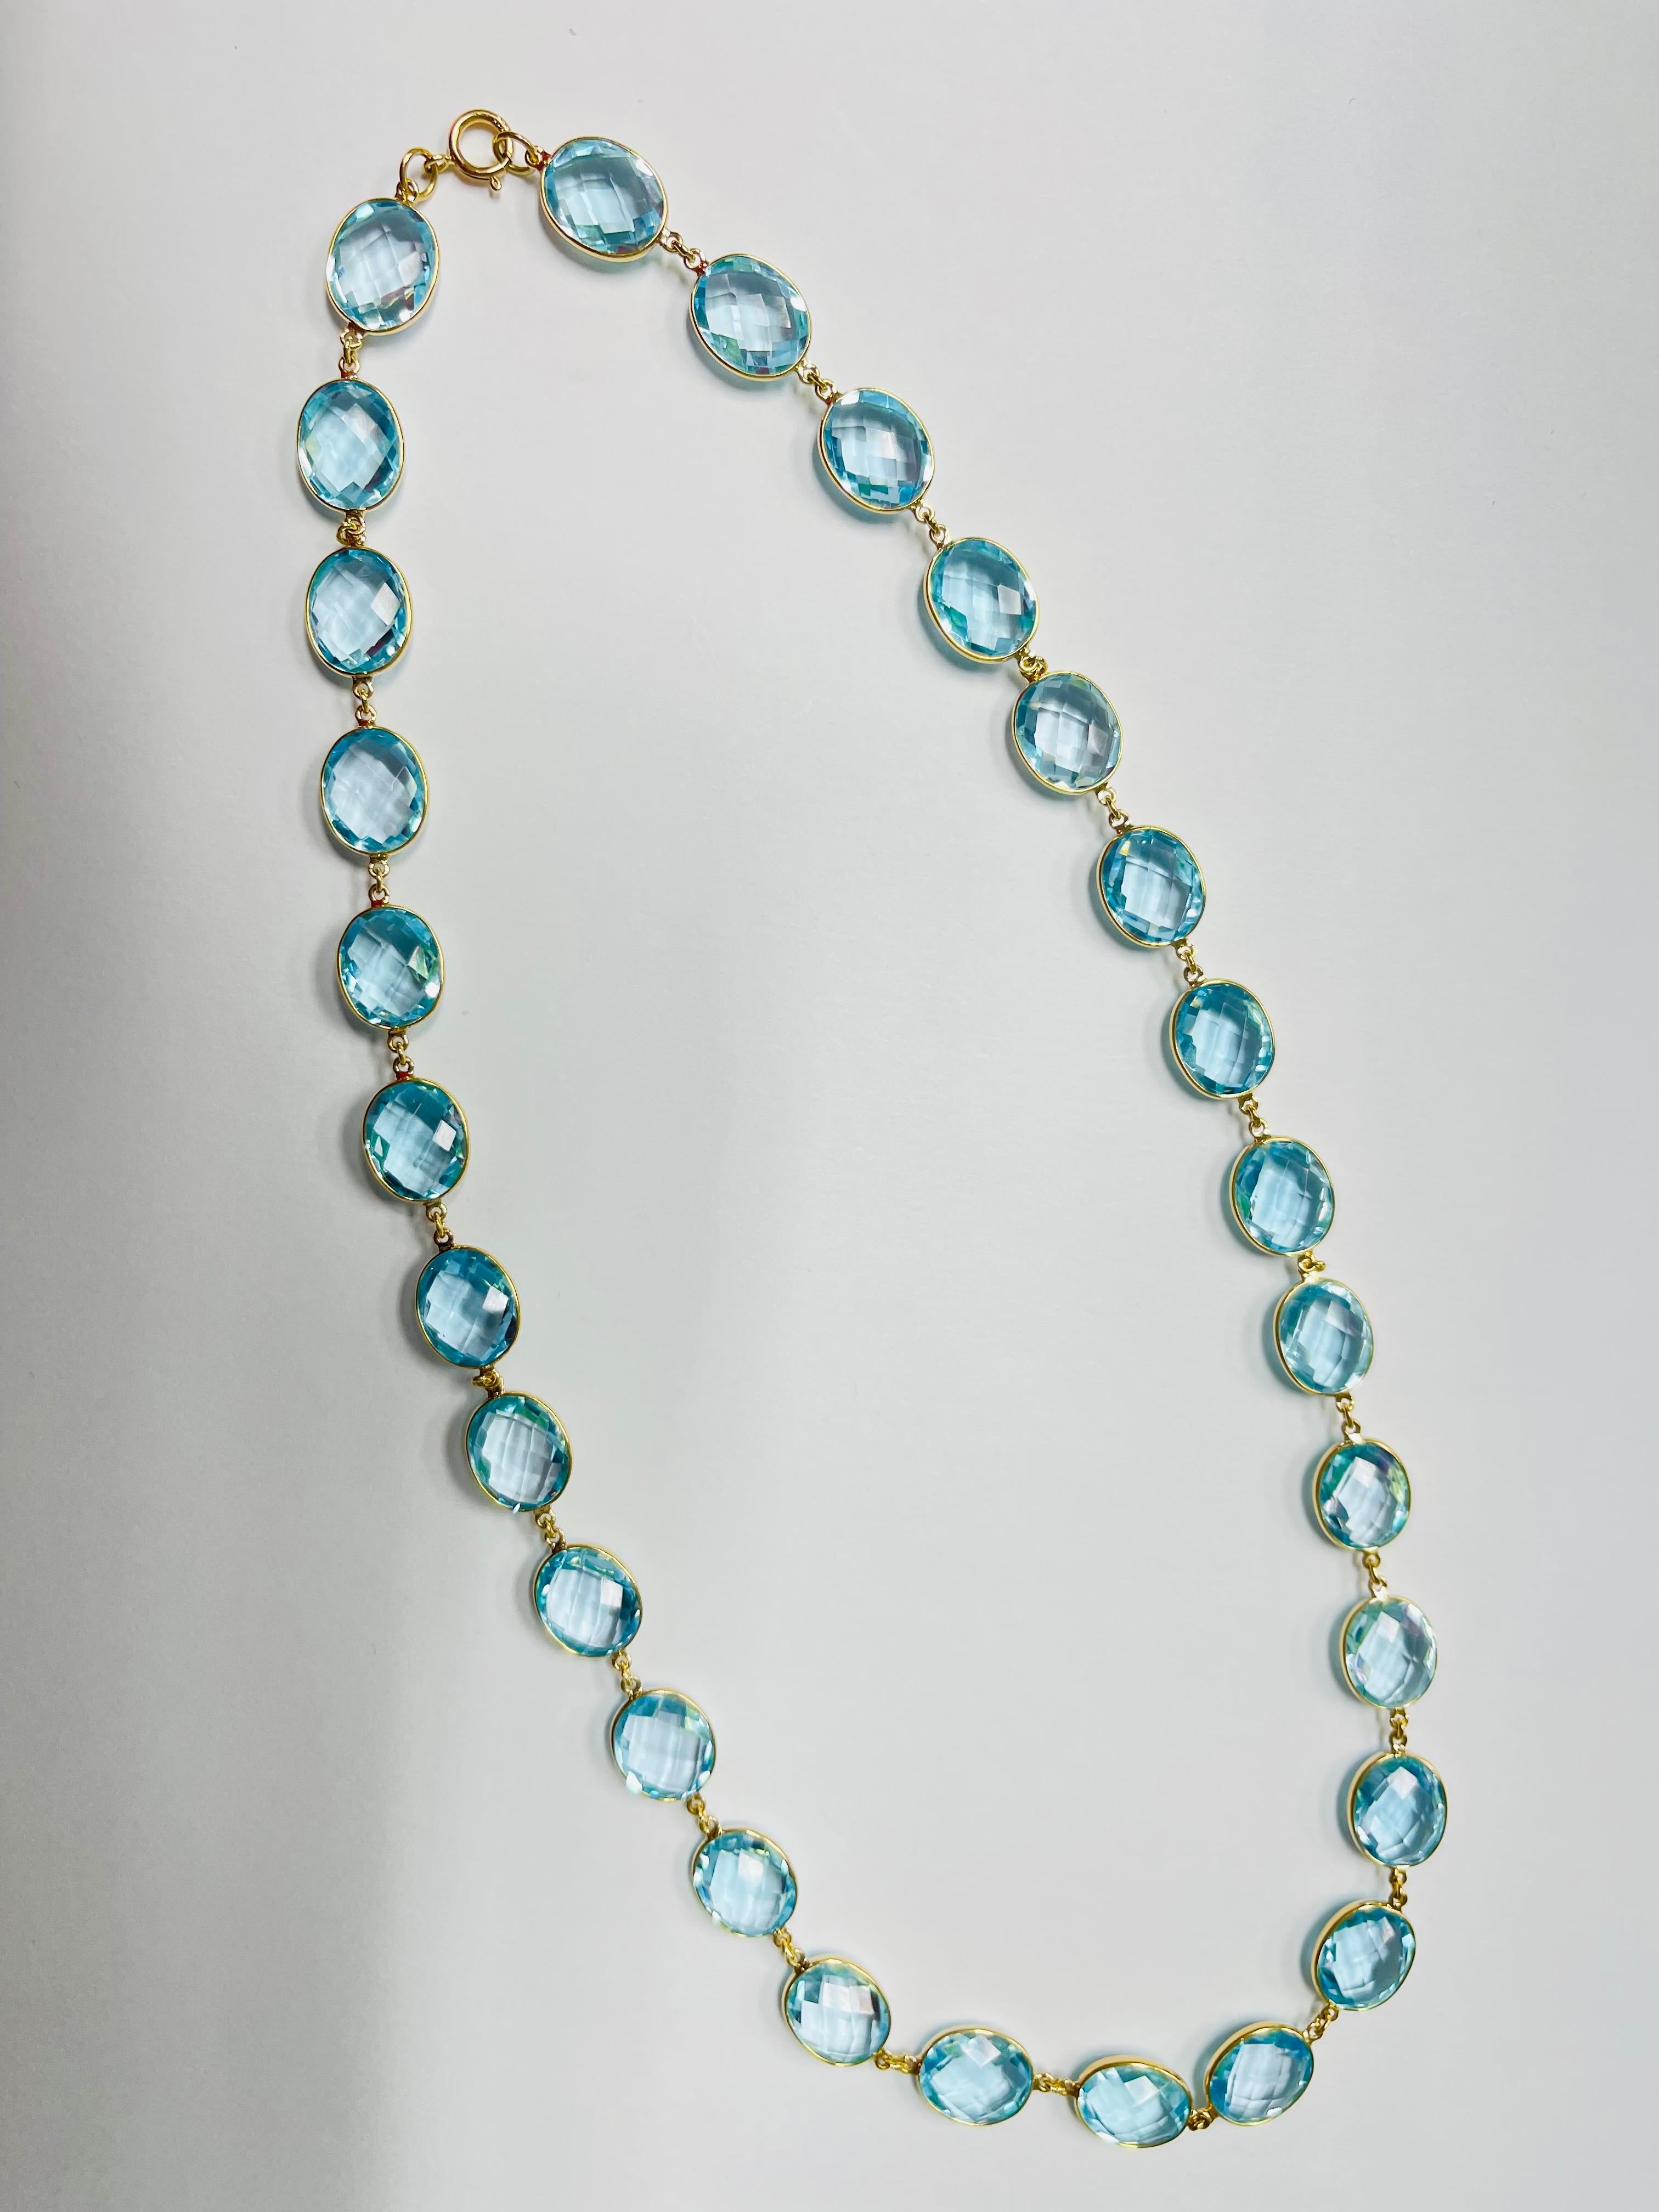 Oval Cut 110 Carats Blue Topaz Necklace in 18K Yellow Gold